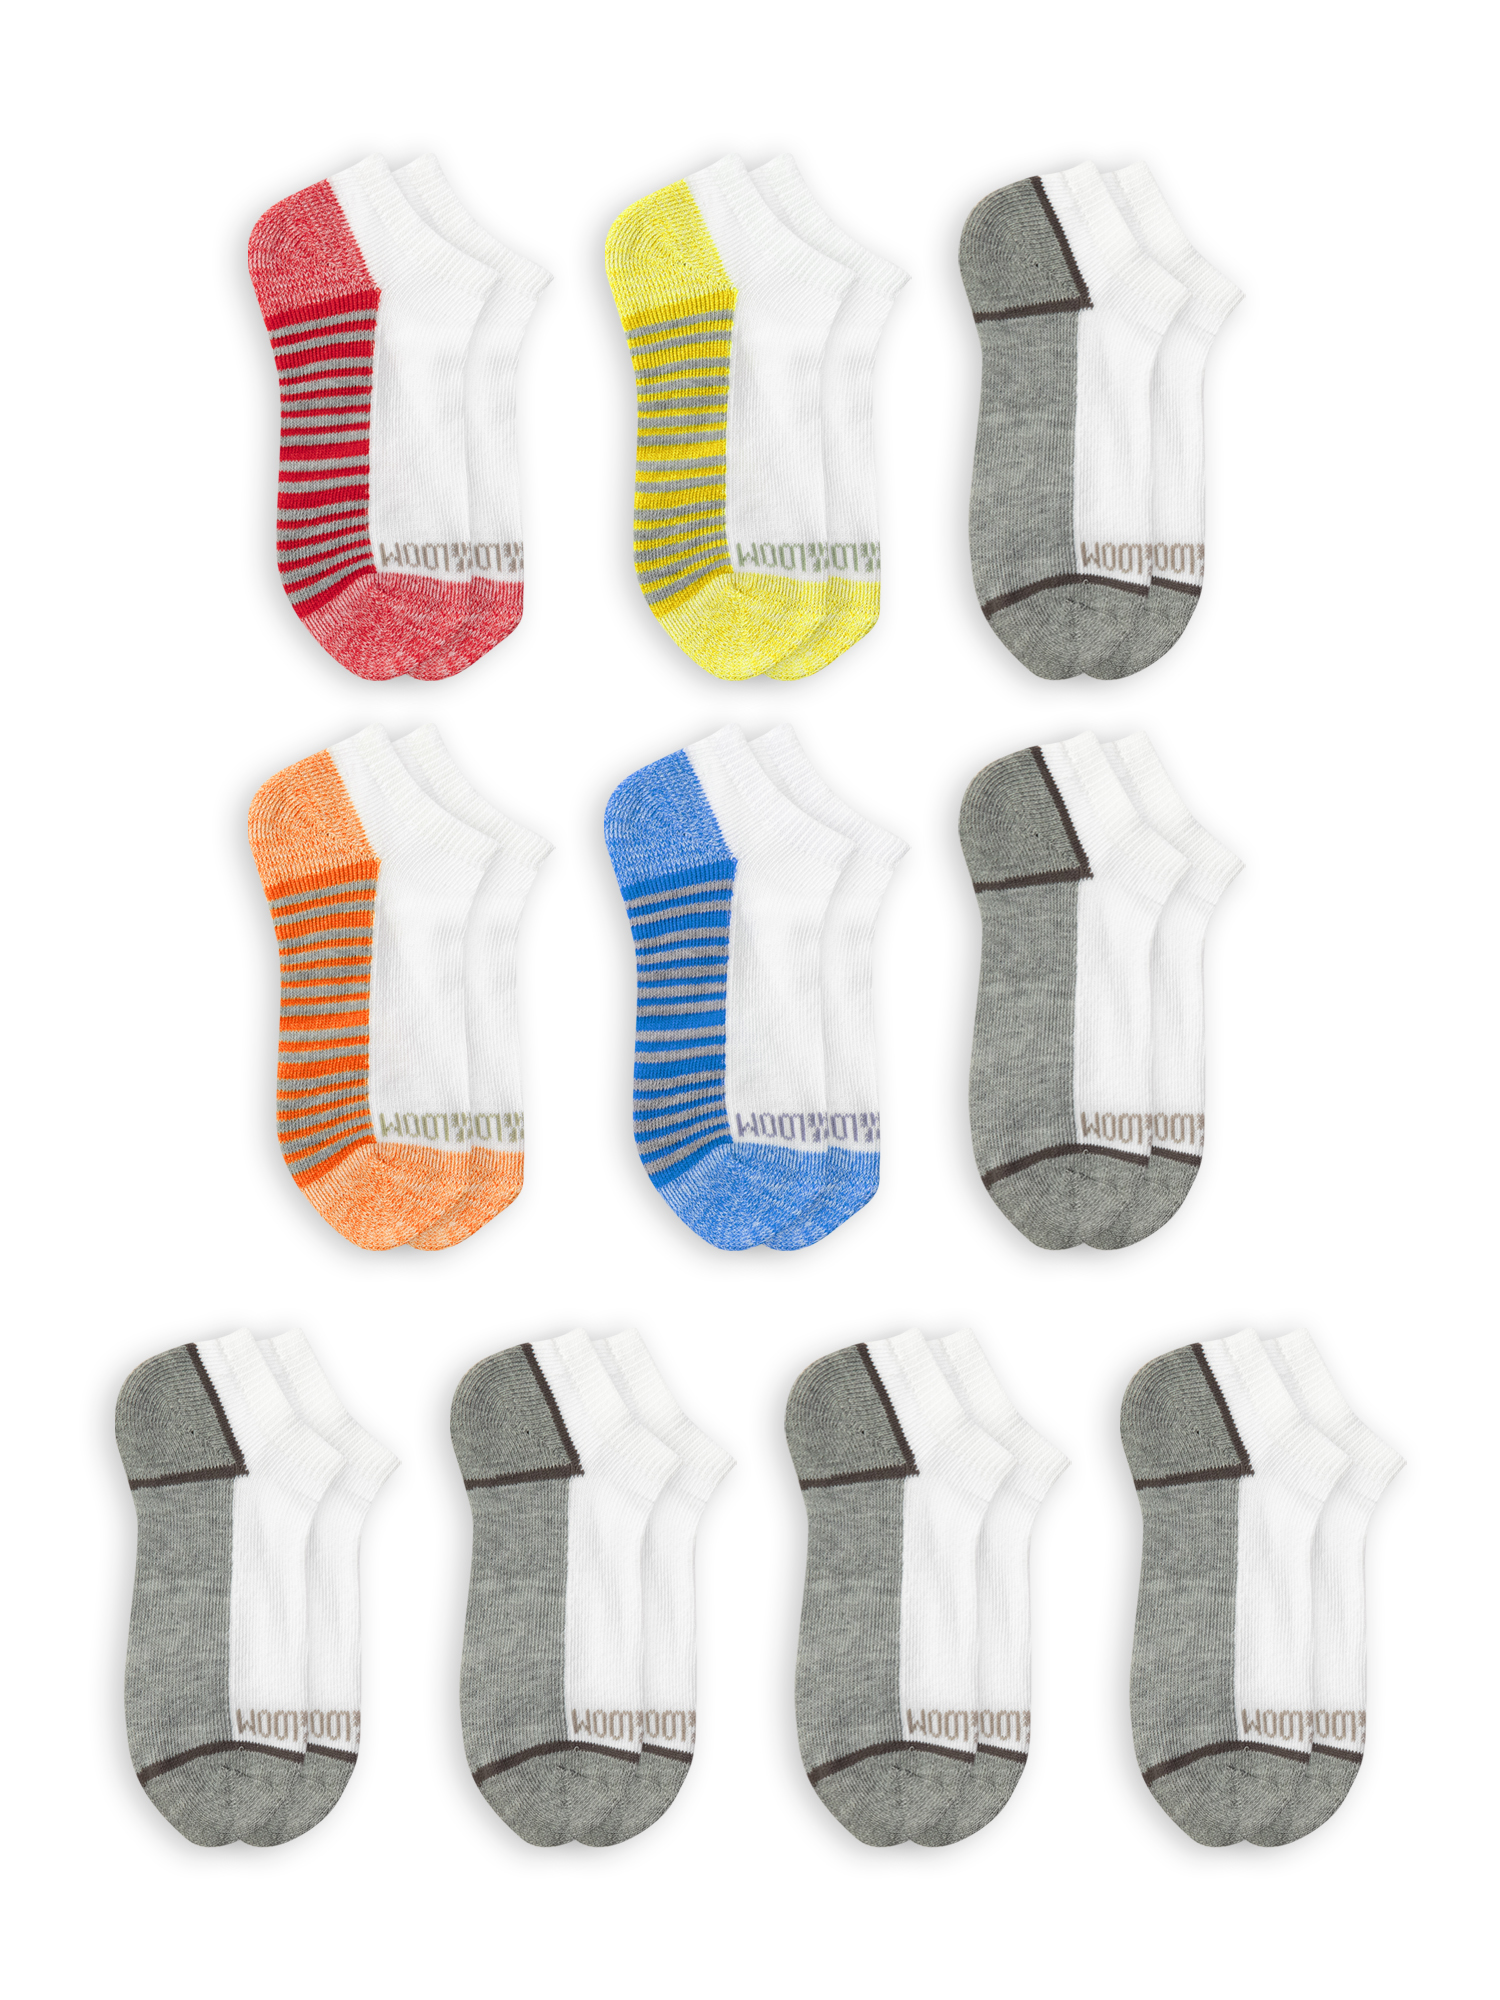 Fruit of the Loom Boys Socks, No Show Zone Cushion 10 Pack Sizes S - L - image 1 of 4